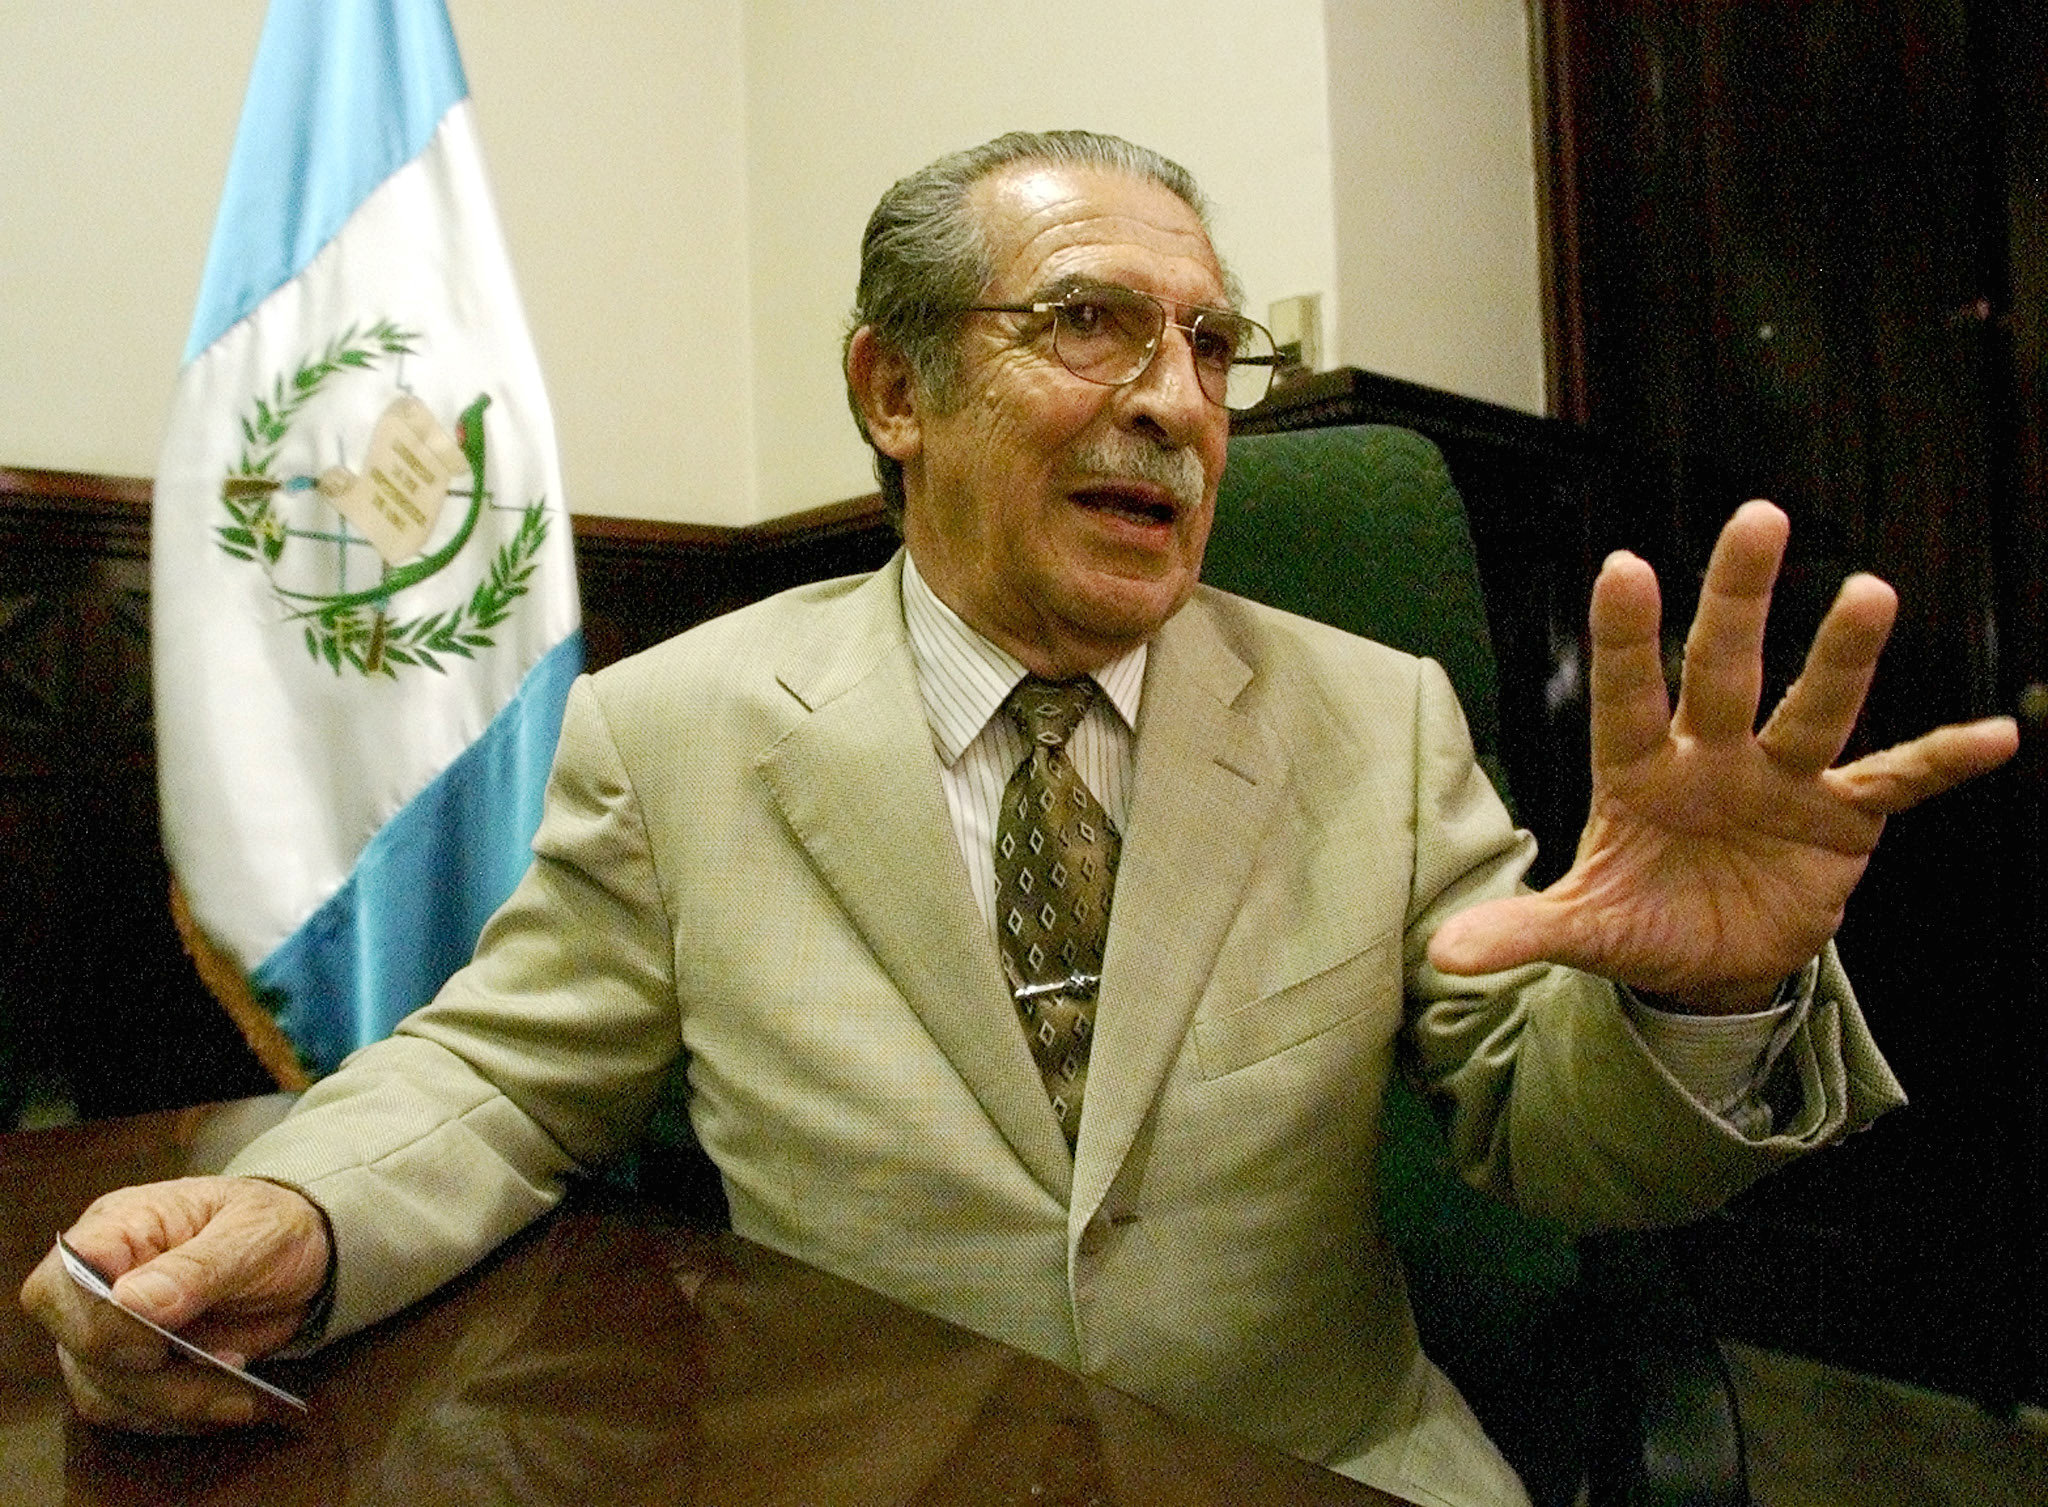 Guatemalan retired Gen. Efrain Rios Montt answers questions during an interview with Reuters at his Guatemala City office, July 2, 2002.